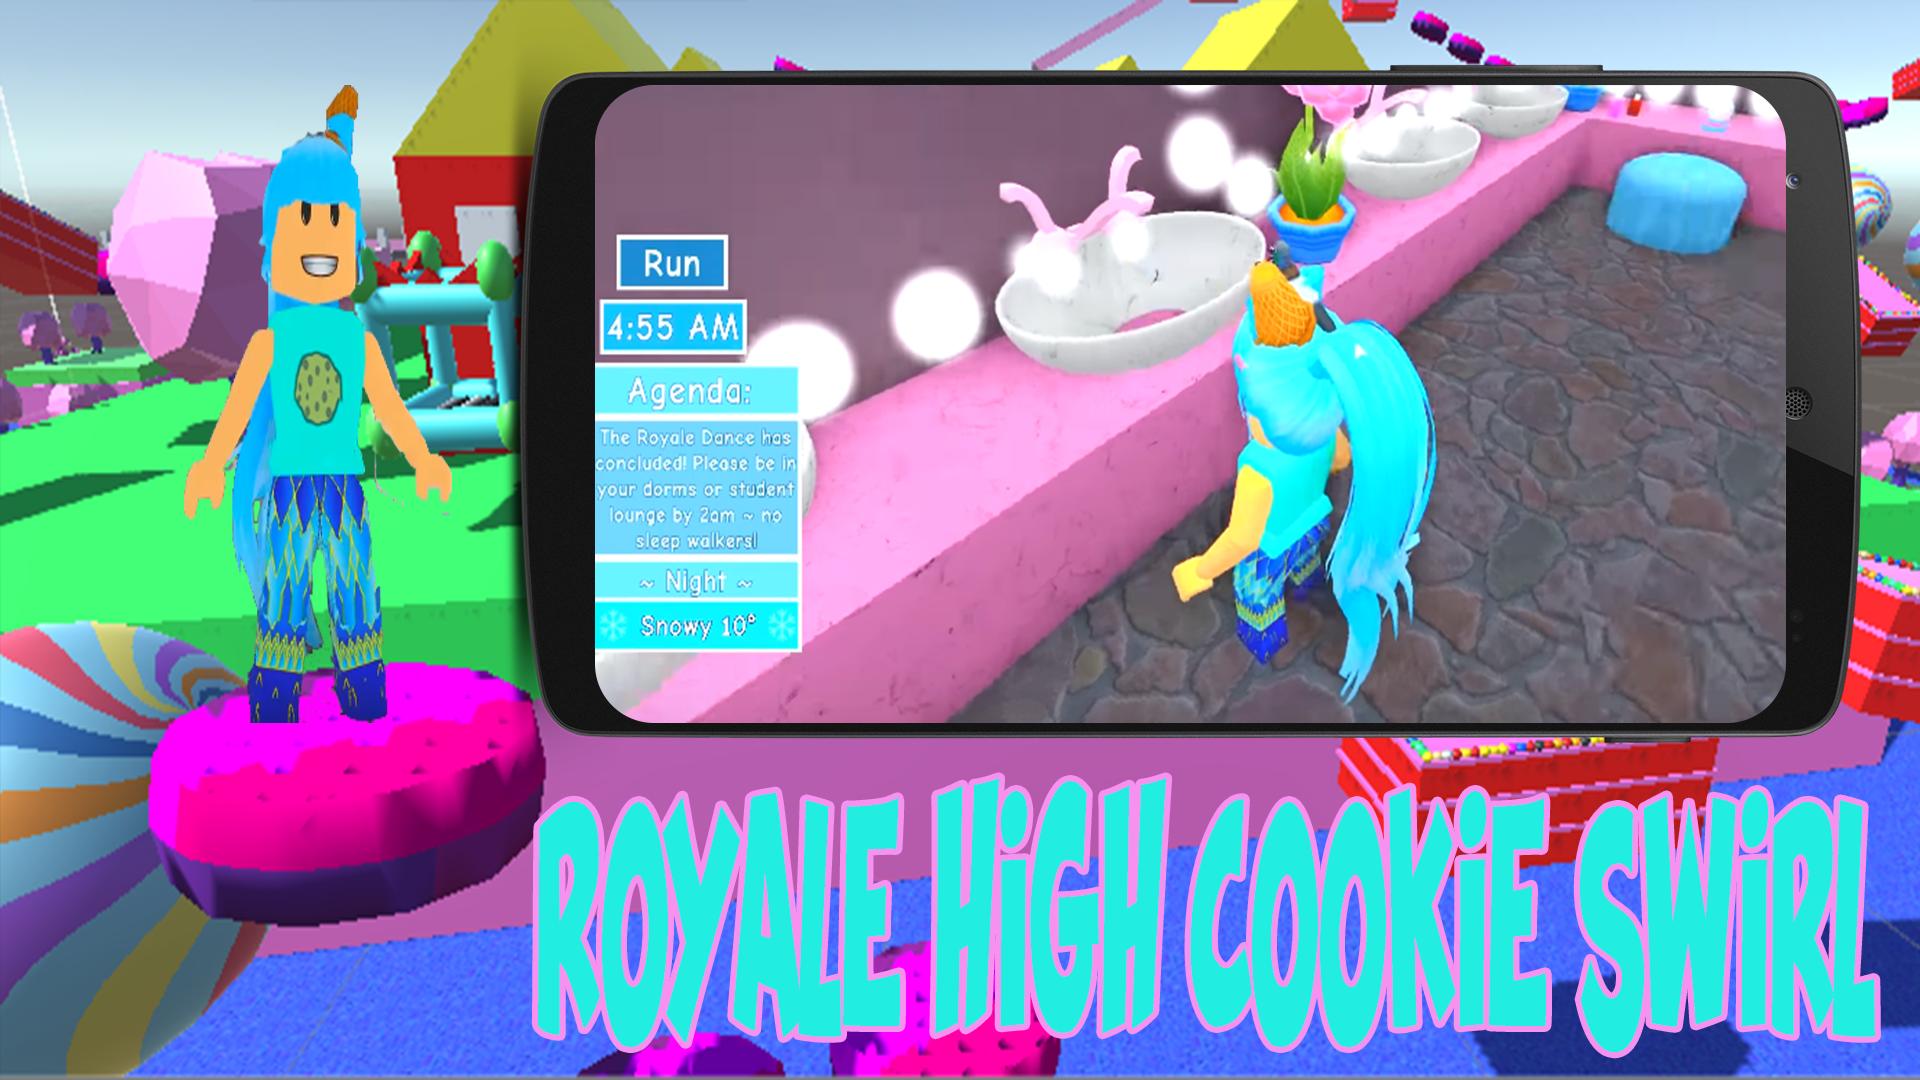 Royale High Cookie Swirl Roblox S Obby For Android Apk Download - juego roblox royale high